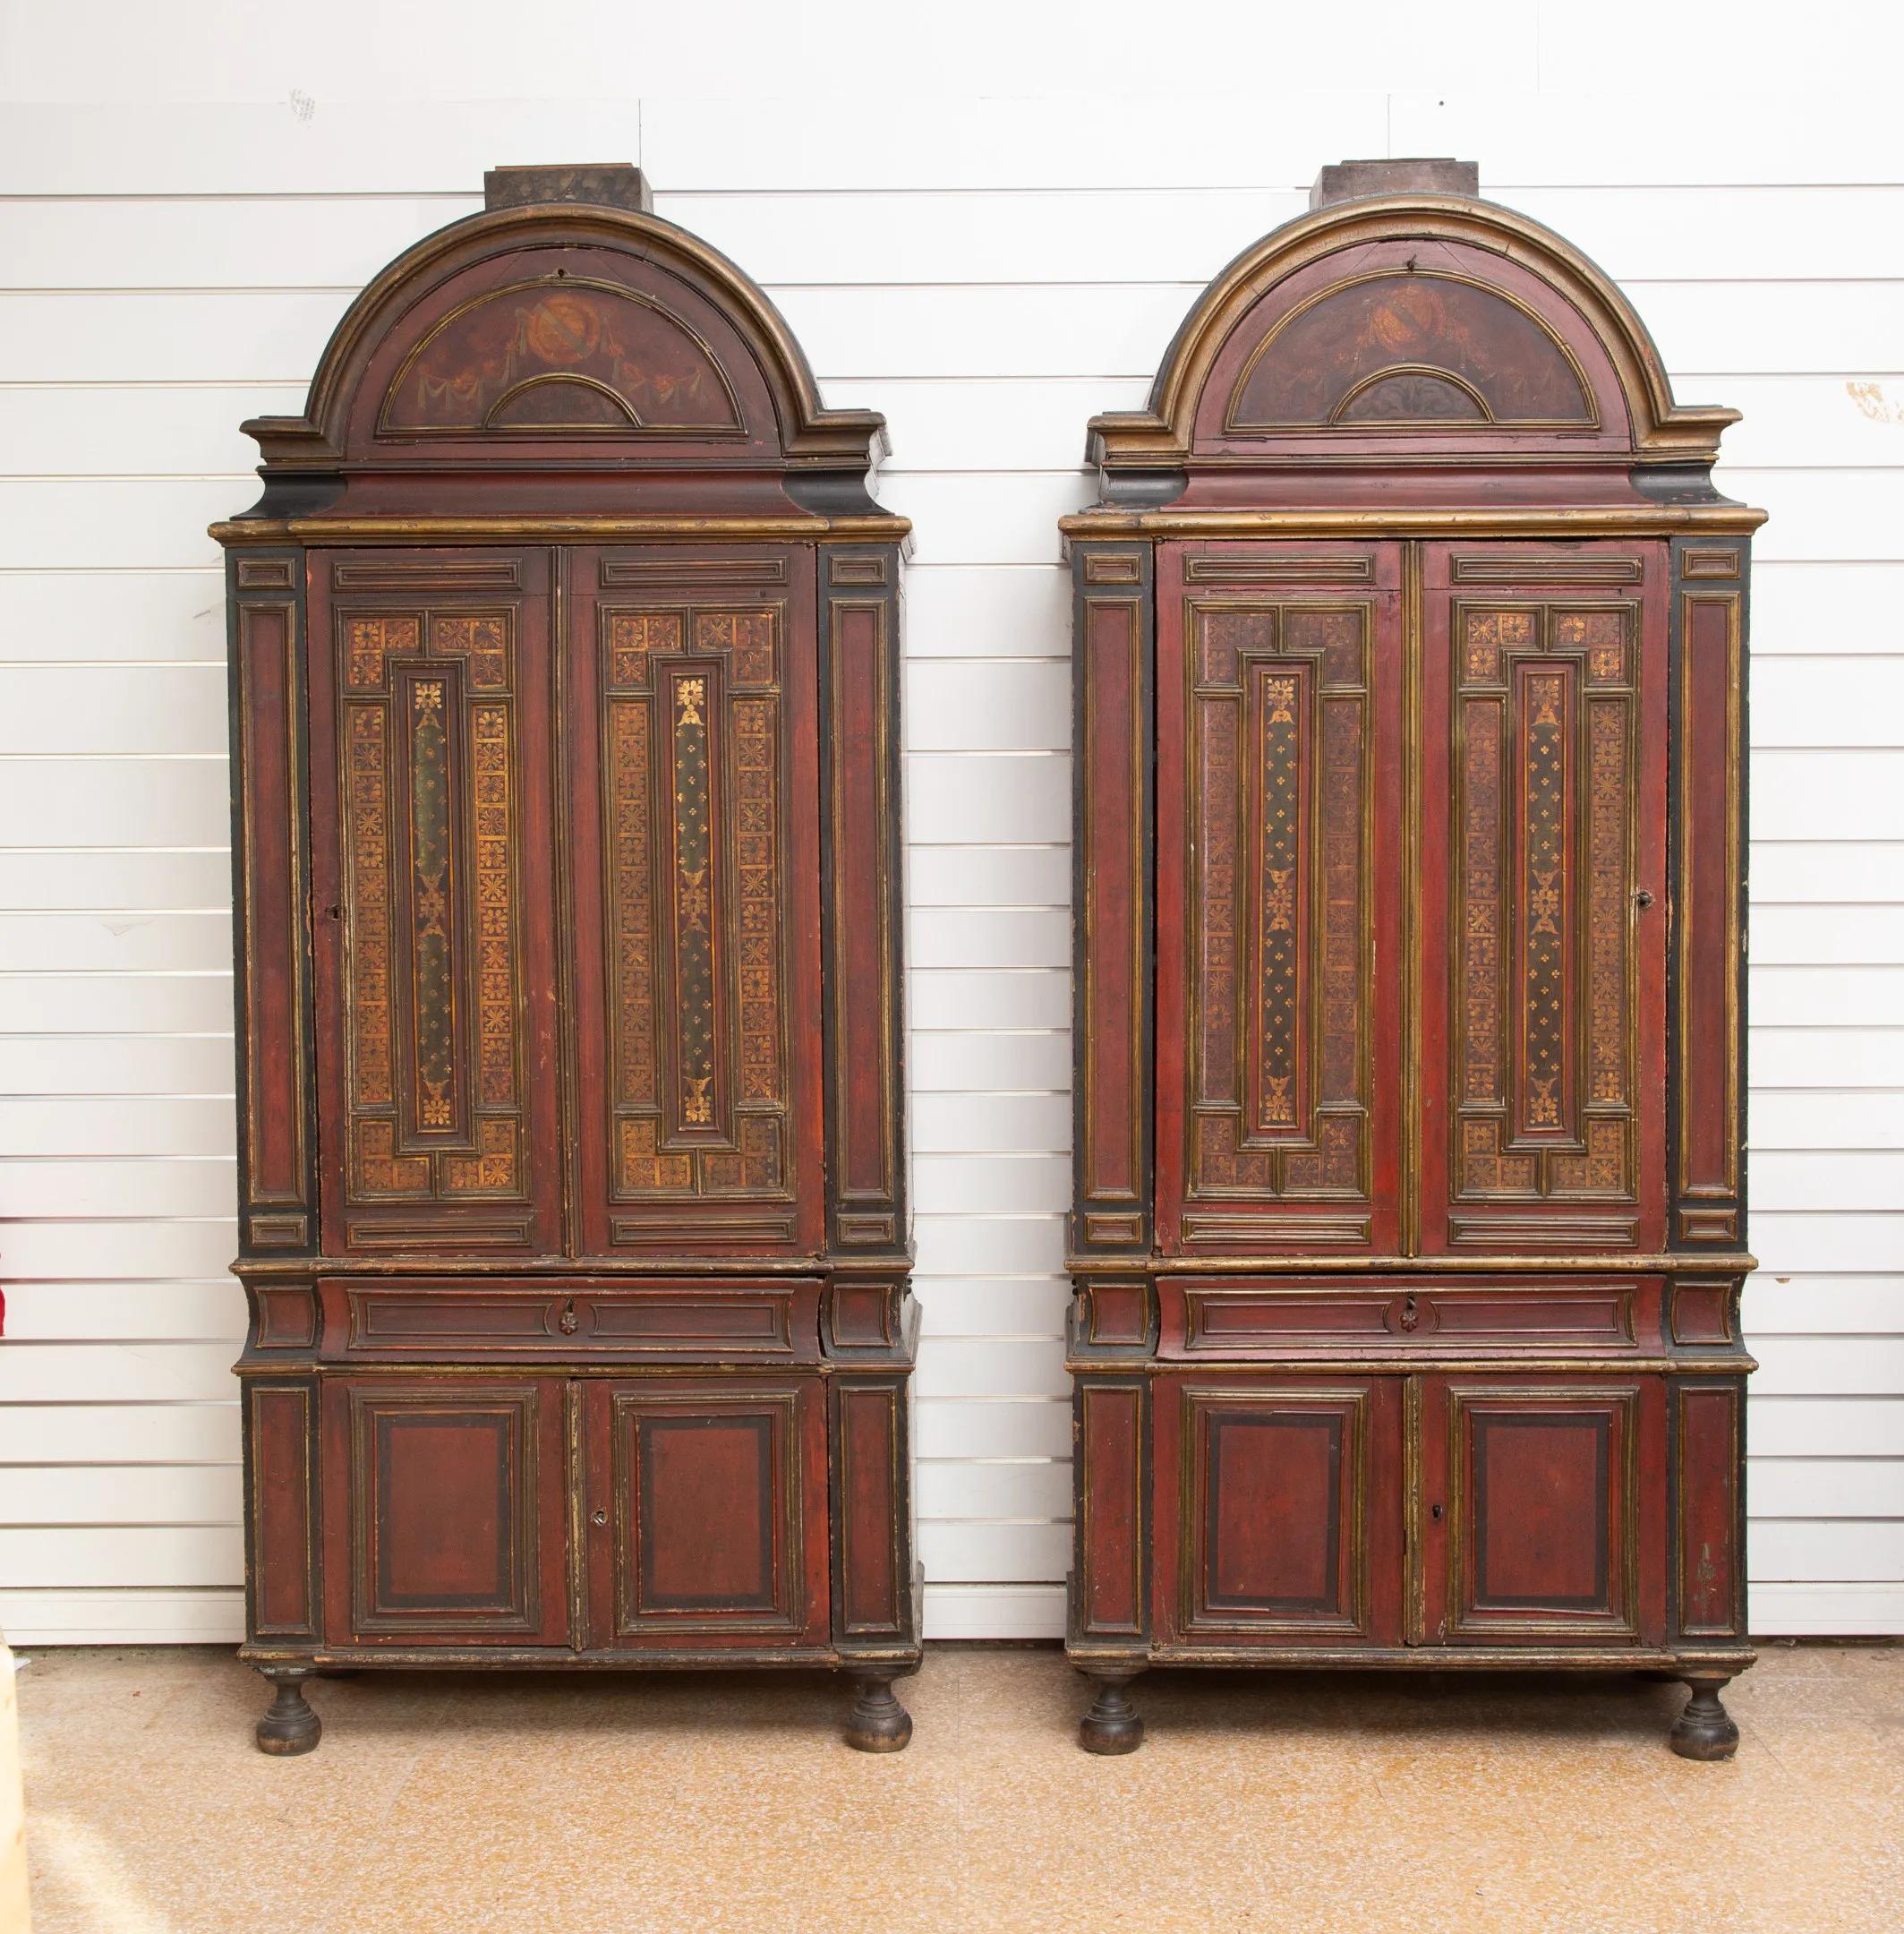 two cabinets in polychromed, painted and gilt wood
Opening with 4 doors, 1 drawer and a flap.
price is for one
two are available